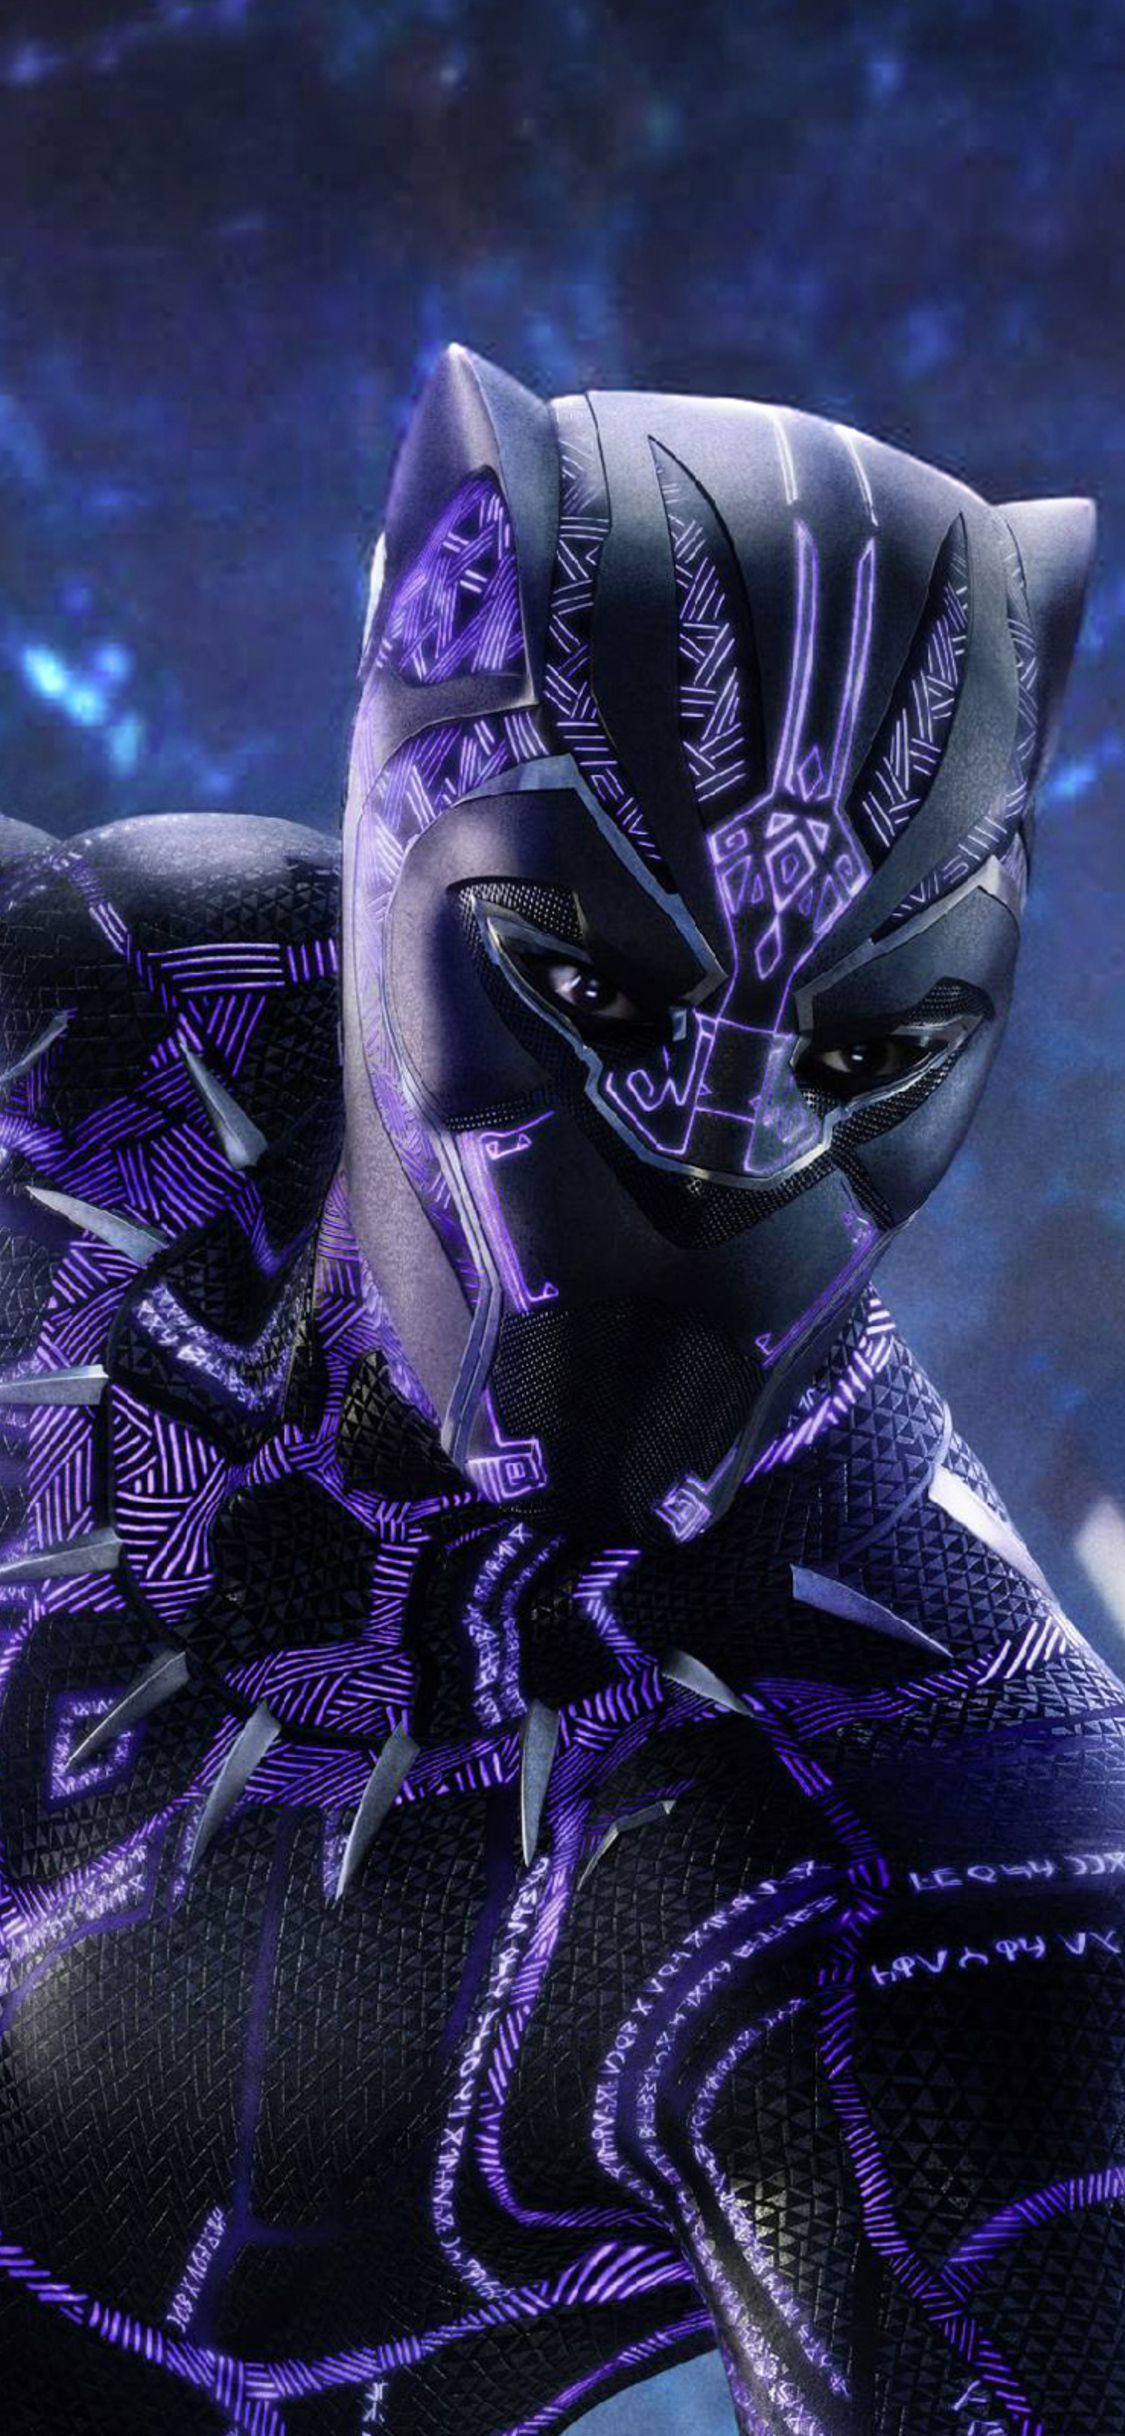 Black Panther Wallpaper - Cool Images Of Black Panther , HD Wallpaper & Backgrounds